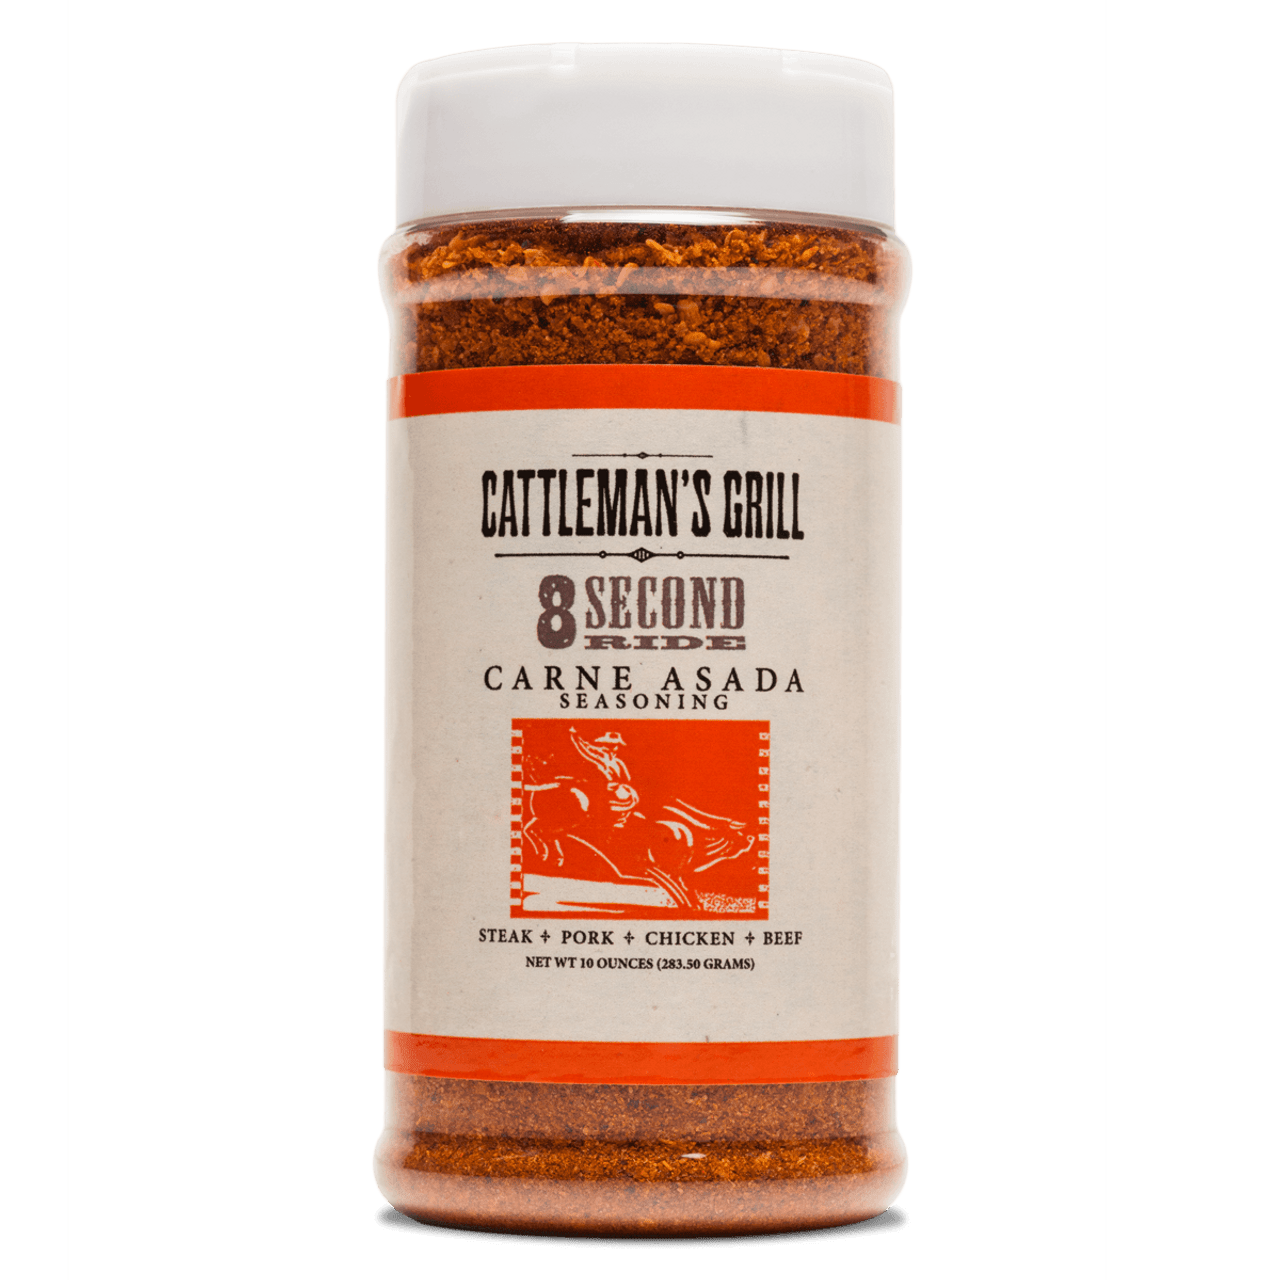 https://cdn11.bigcommerce.com/s-nntqct/images/stencil/1280x1280/products/16224/17805/cattlemans-grill-8-second-ride-carne-asada-seasoning-10-oz-front__09146.1557447497.png?c=2